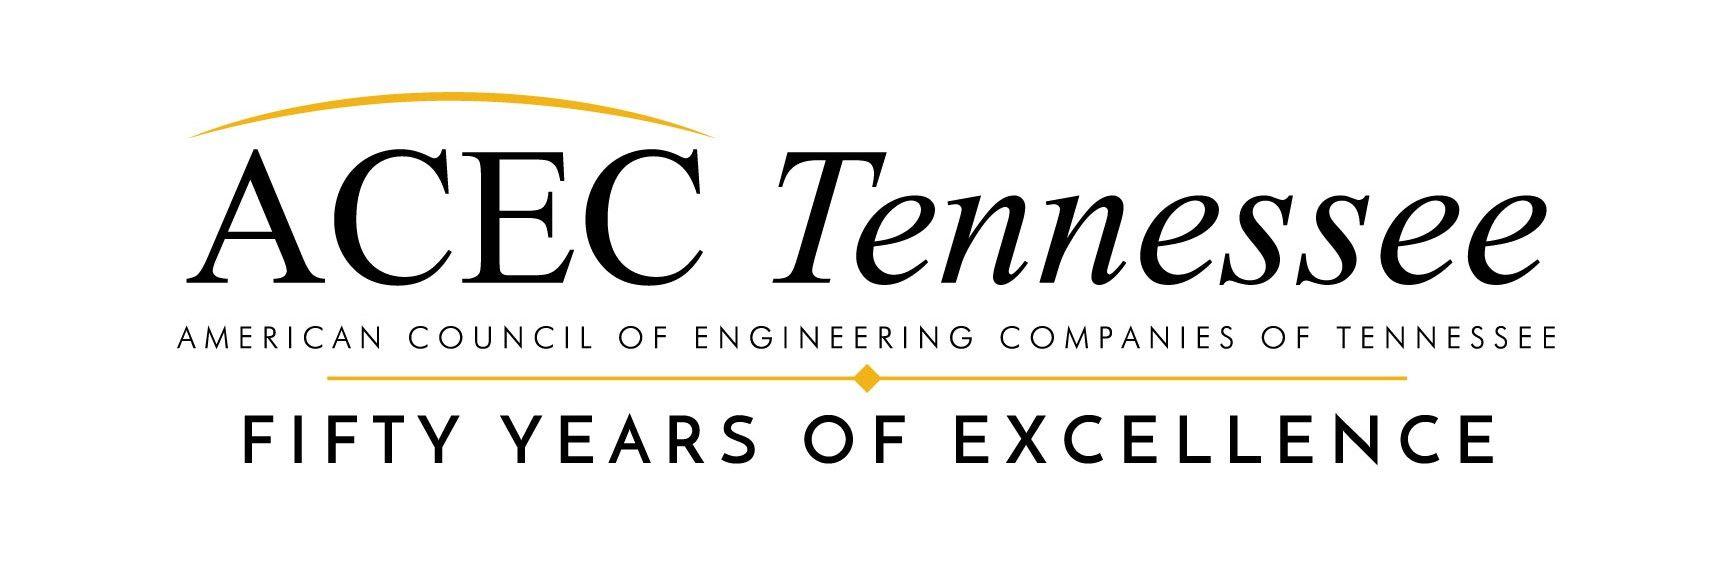 ACEC Logo - Acec Tennessee 50th Business Logo 2018 ActionsProve, LLC